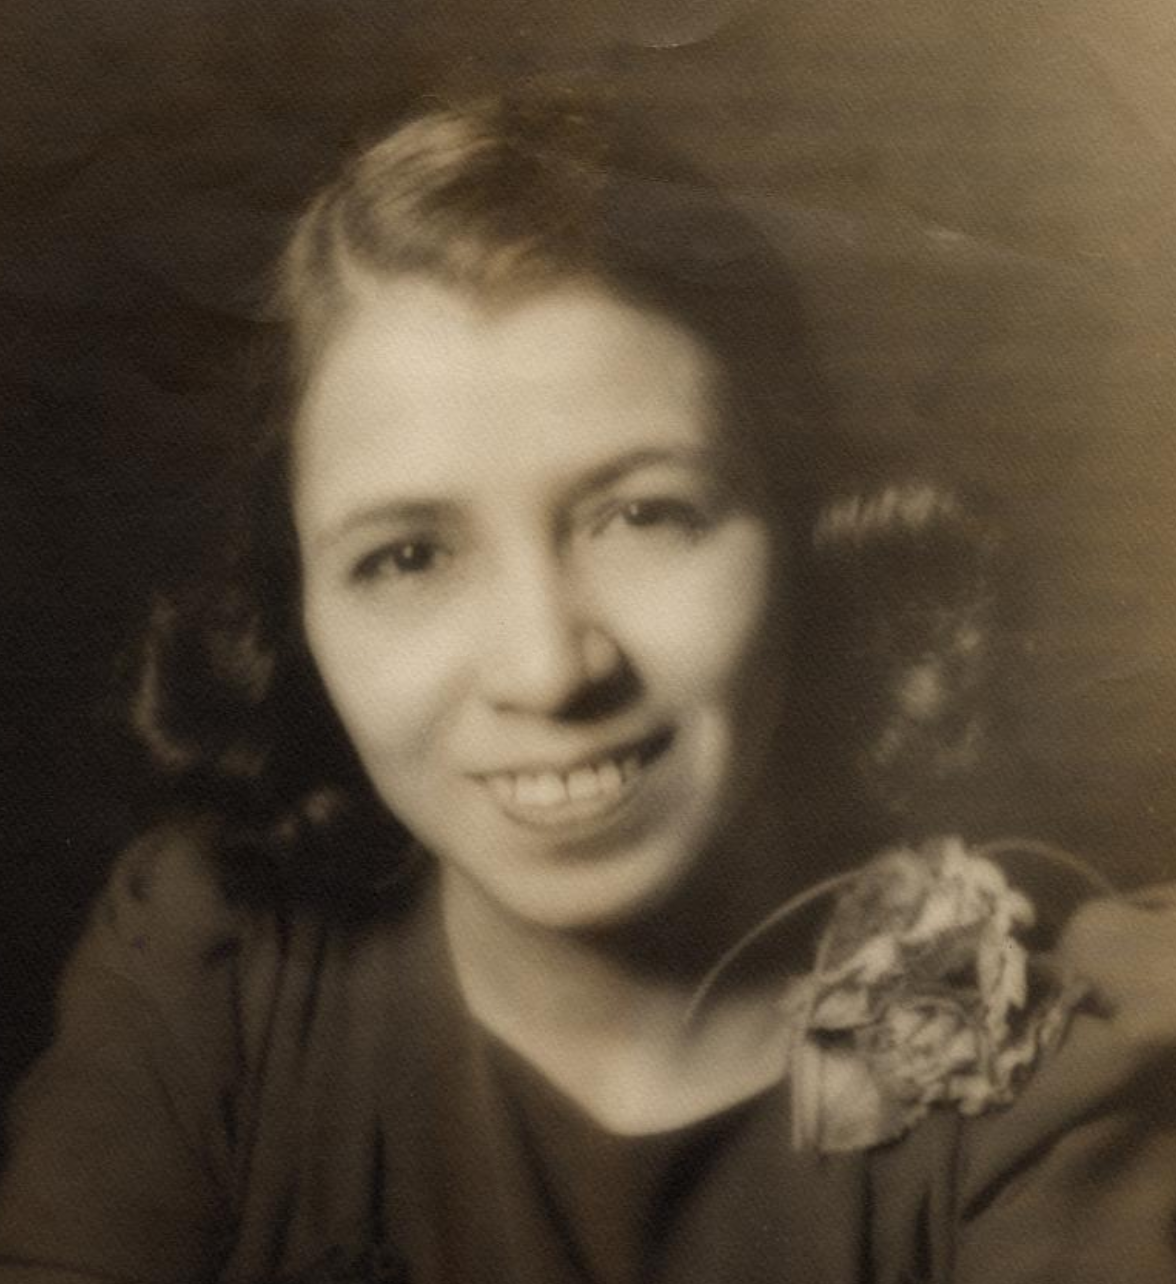 A circa 1930s headshot of Clotilde Arias, who worked in advertising in New York City and composed the Spanish translation of the Star-Spangled Banner that is "the only official translation of the national anthem allowed to be sung," according to the Smithsonian Institution. (Courtesy of the National Museum of American History, Smithsonian Institution)